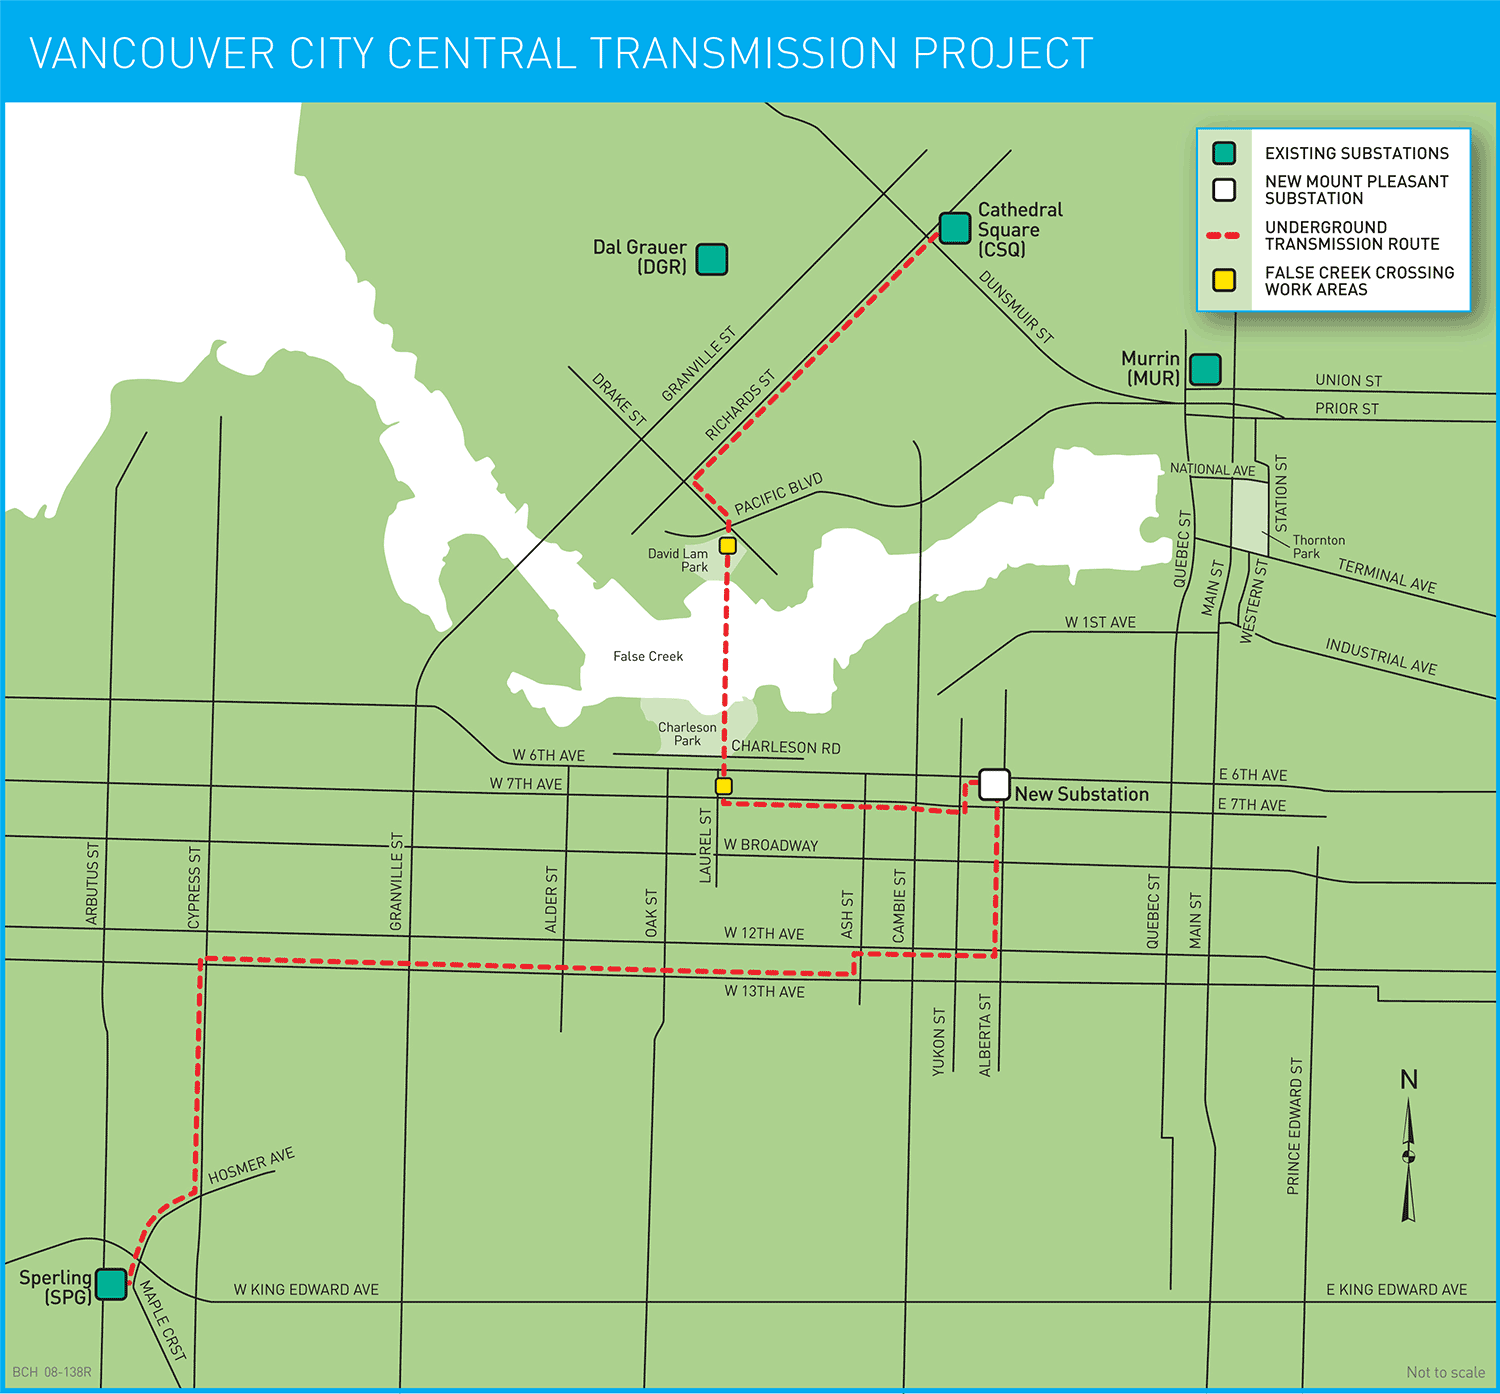 Image of Vancouver City Central Transmission Project map